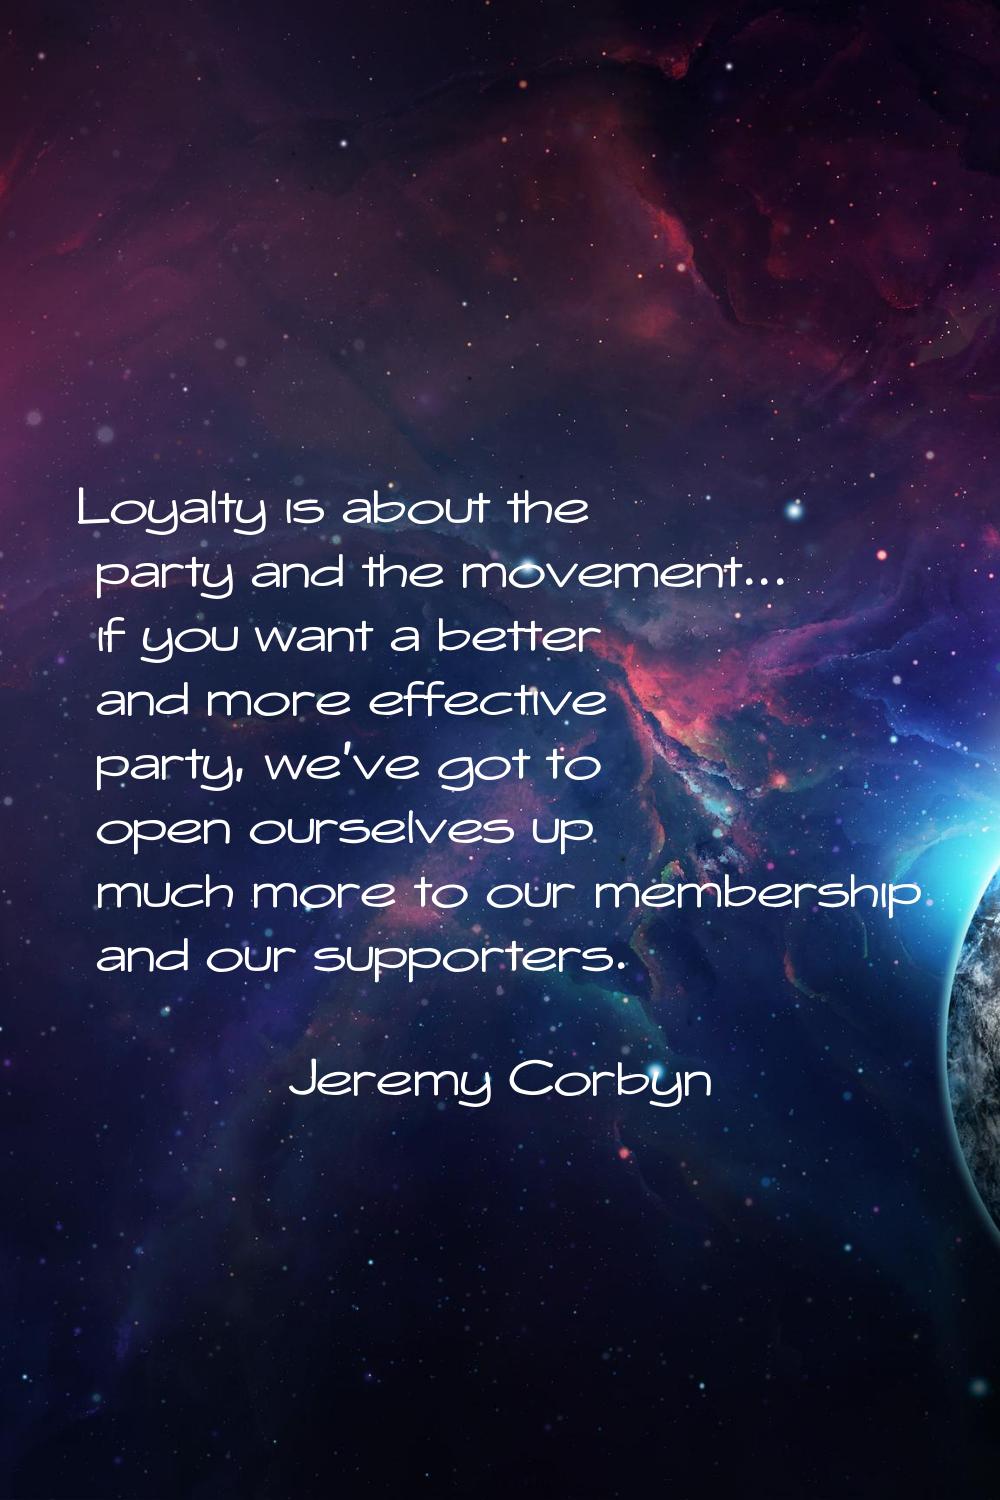 Loyalty is about the party and the movement... if you want a better and more effective party, we've